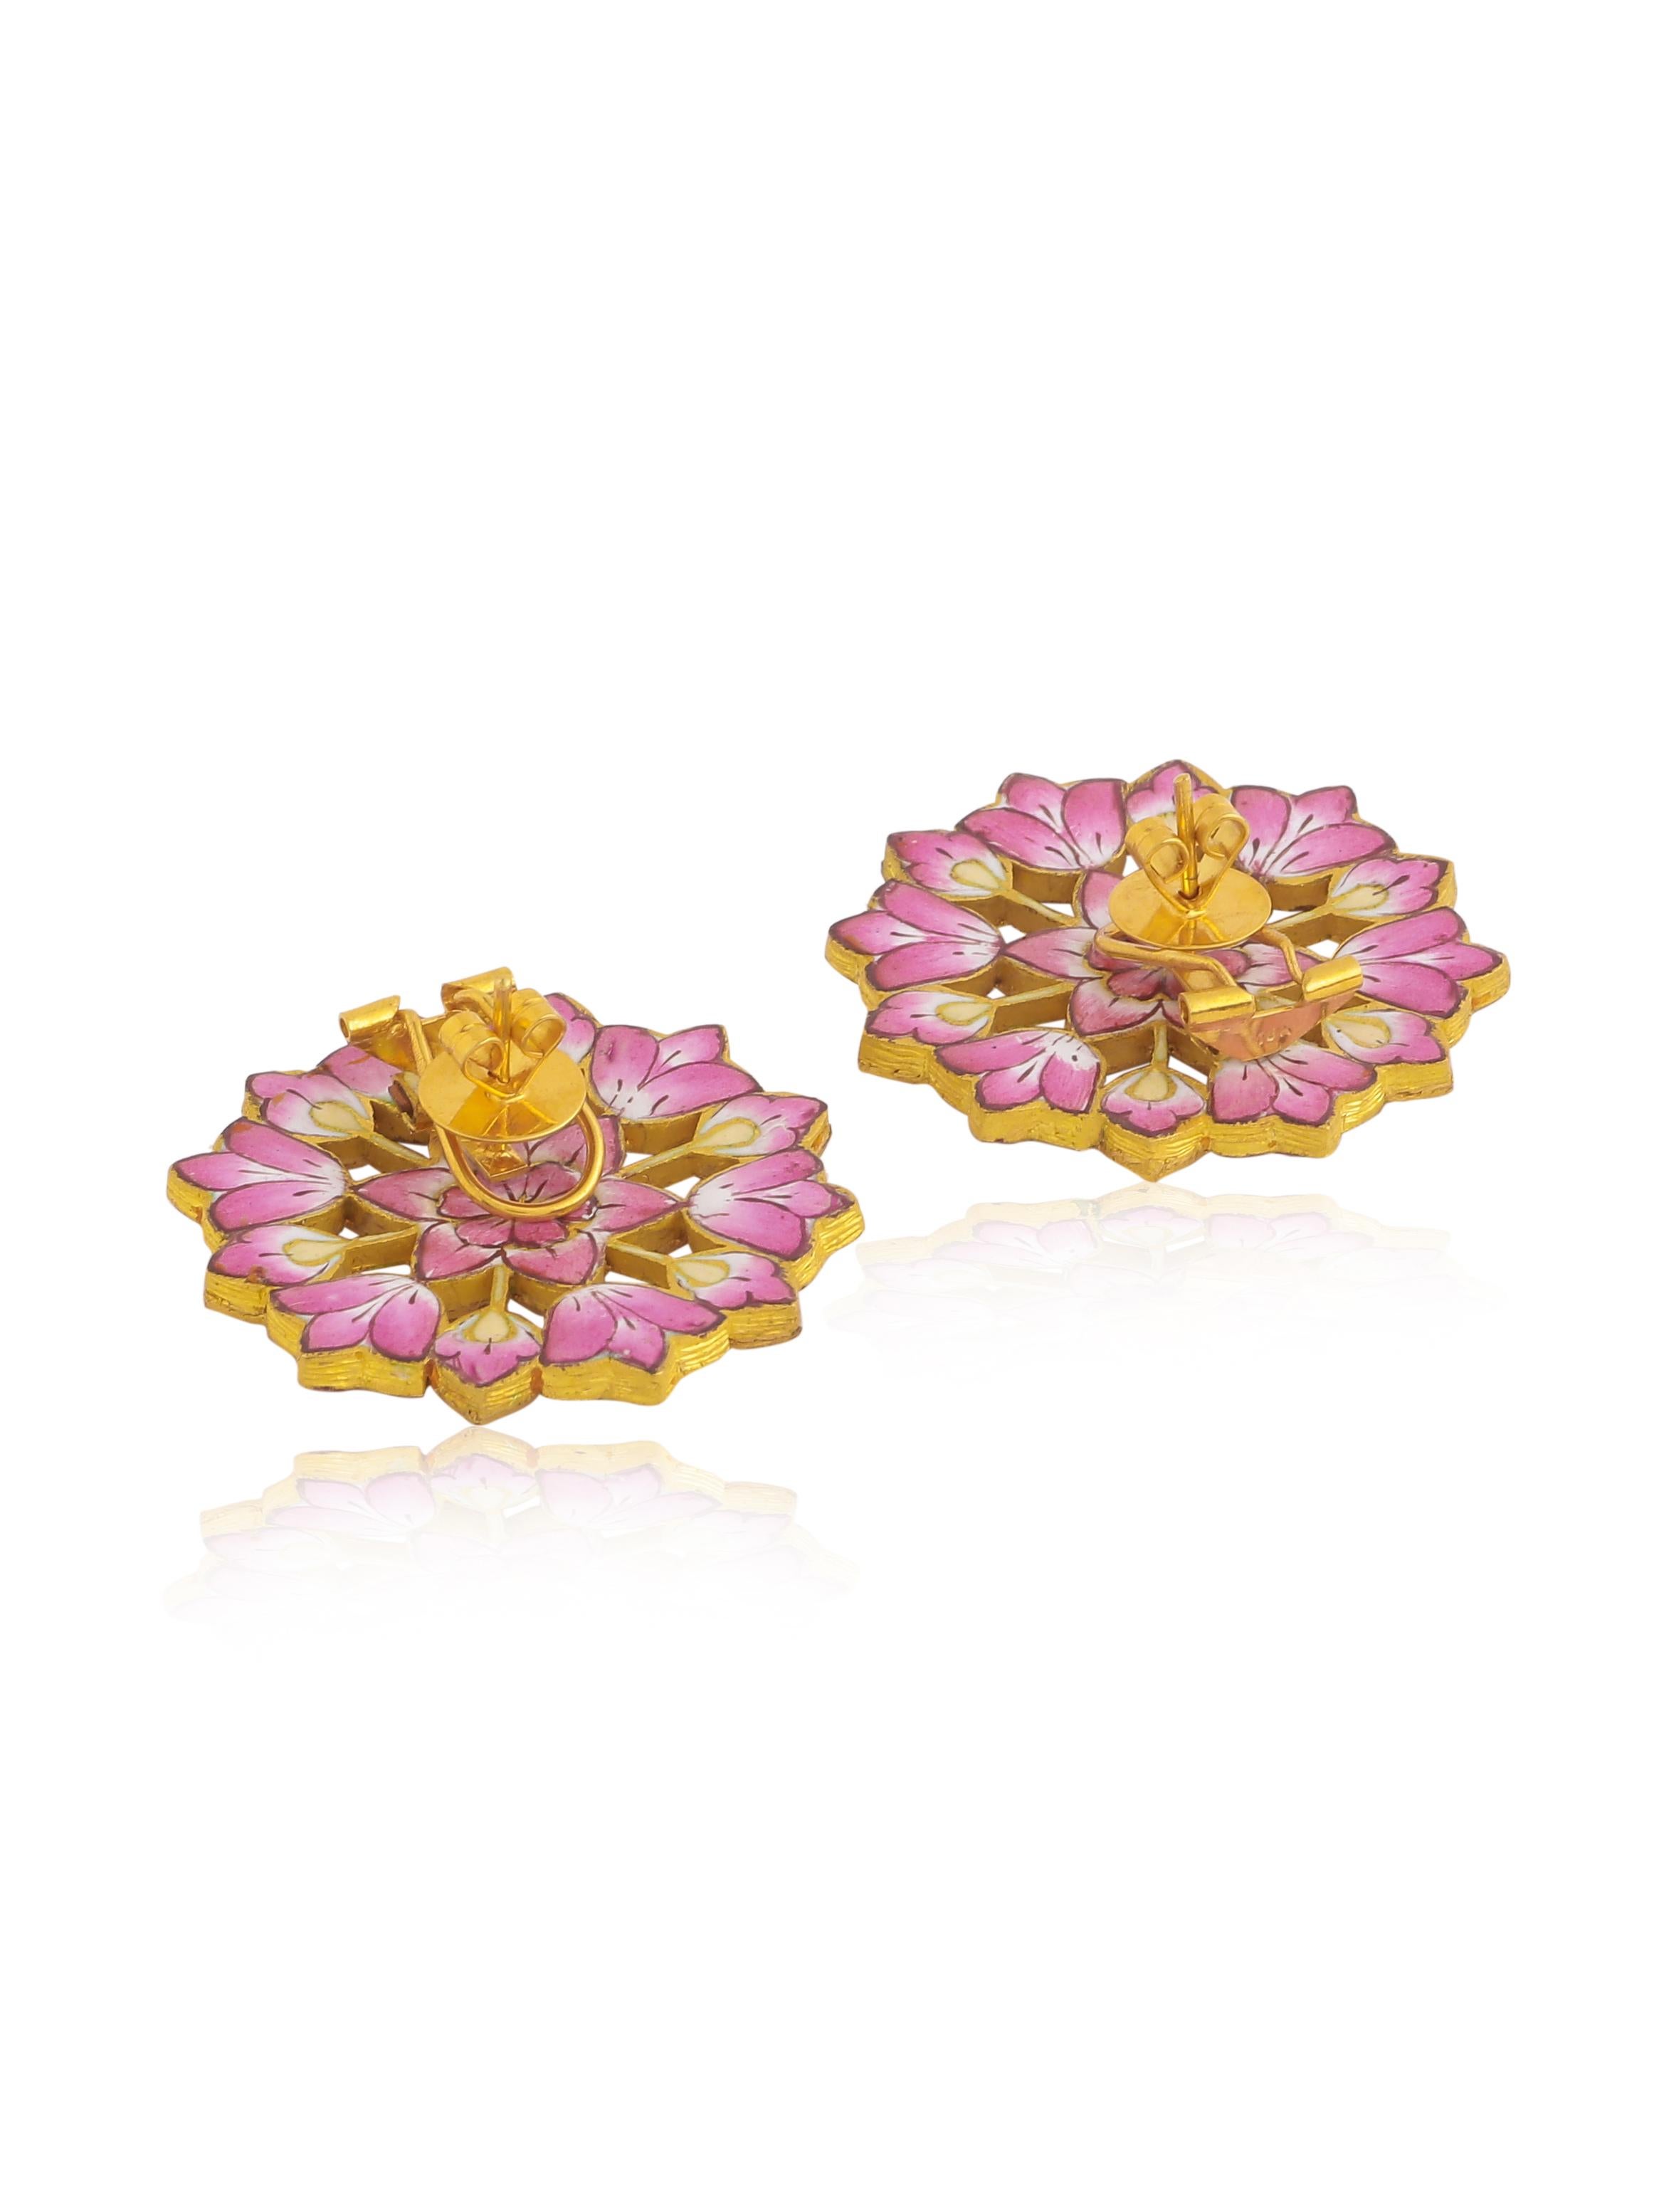 Art Deco Diamond and Enamel Floral Stud Earring Pair Handcrafted in 18 Karat Gold For Sale